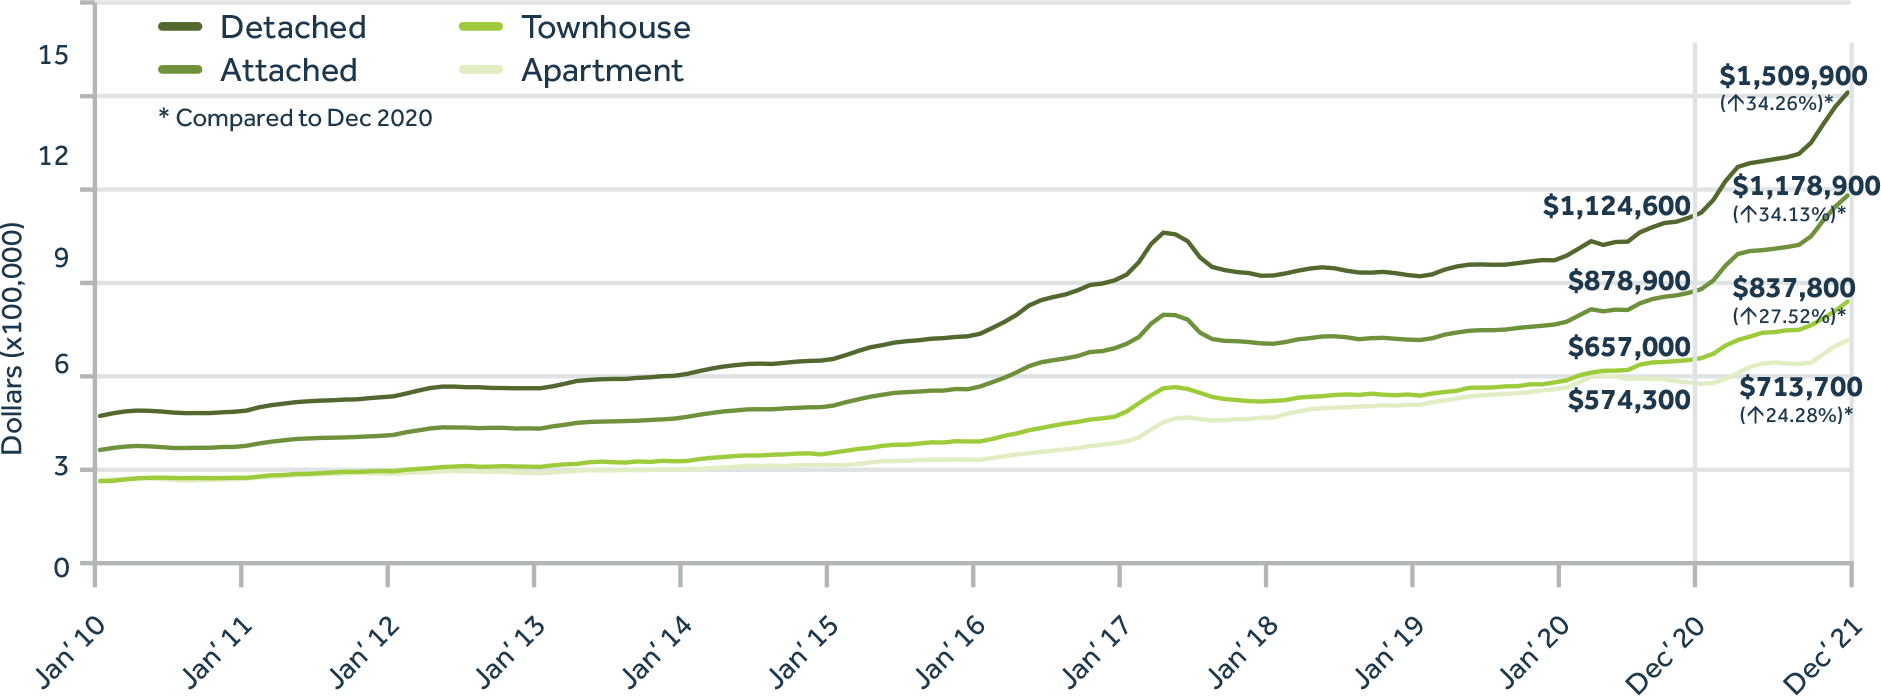 Line graph showing price of homes rising